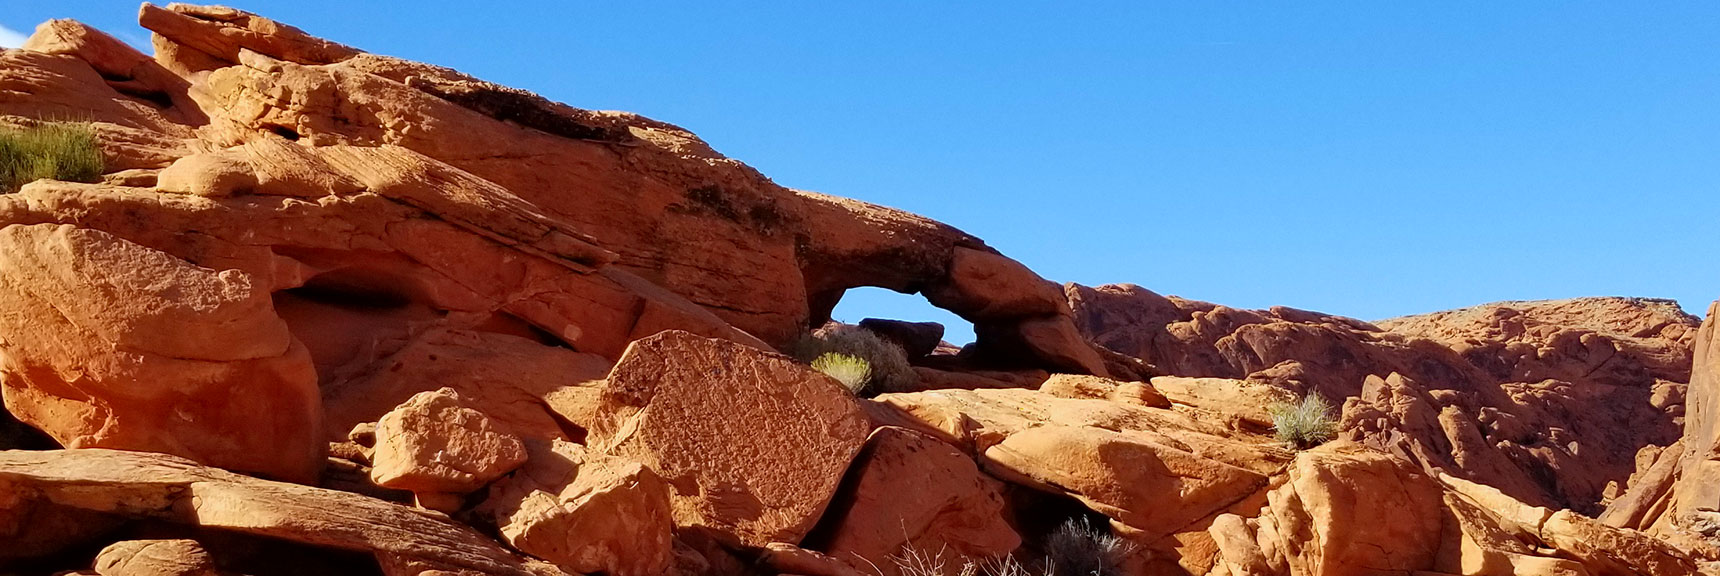 Arch Beyond Mouse's Tank Trail in Valley of Fire State Park, Nevada